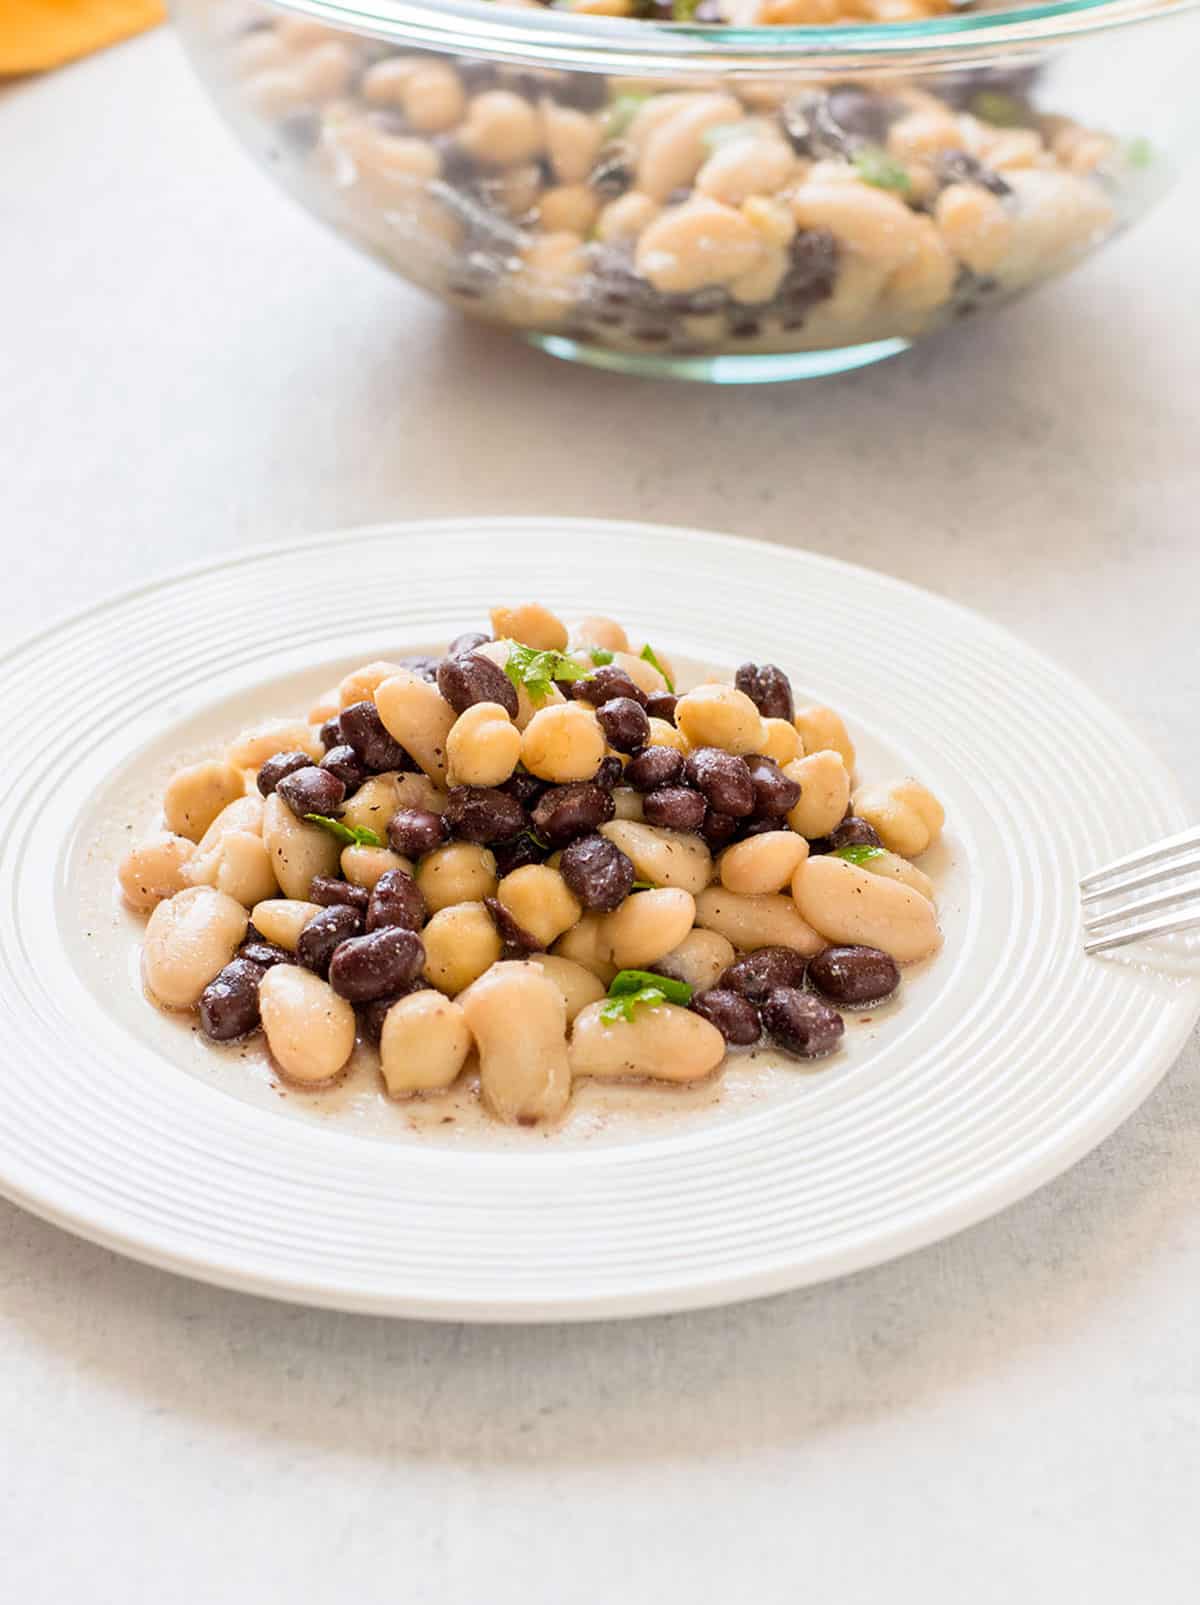 Italian bean salad on plate with fork, serving bowl in background